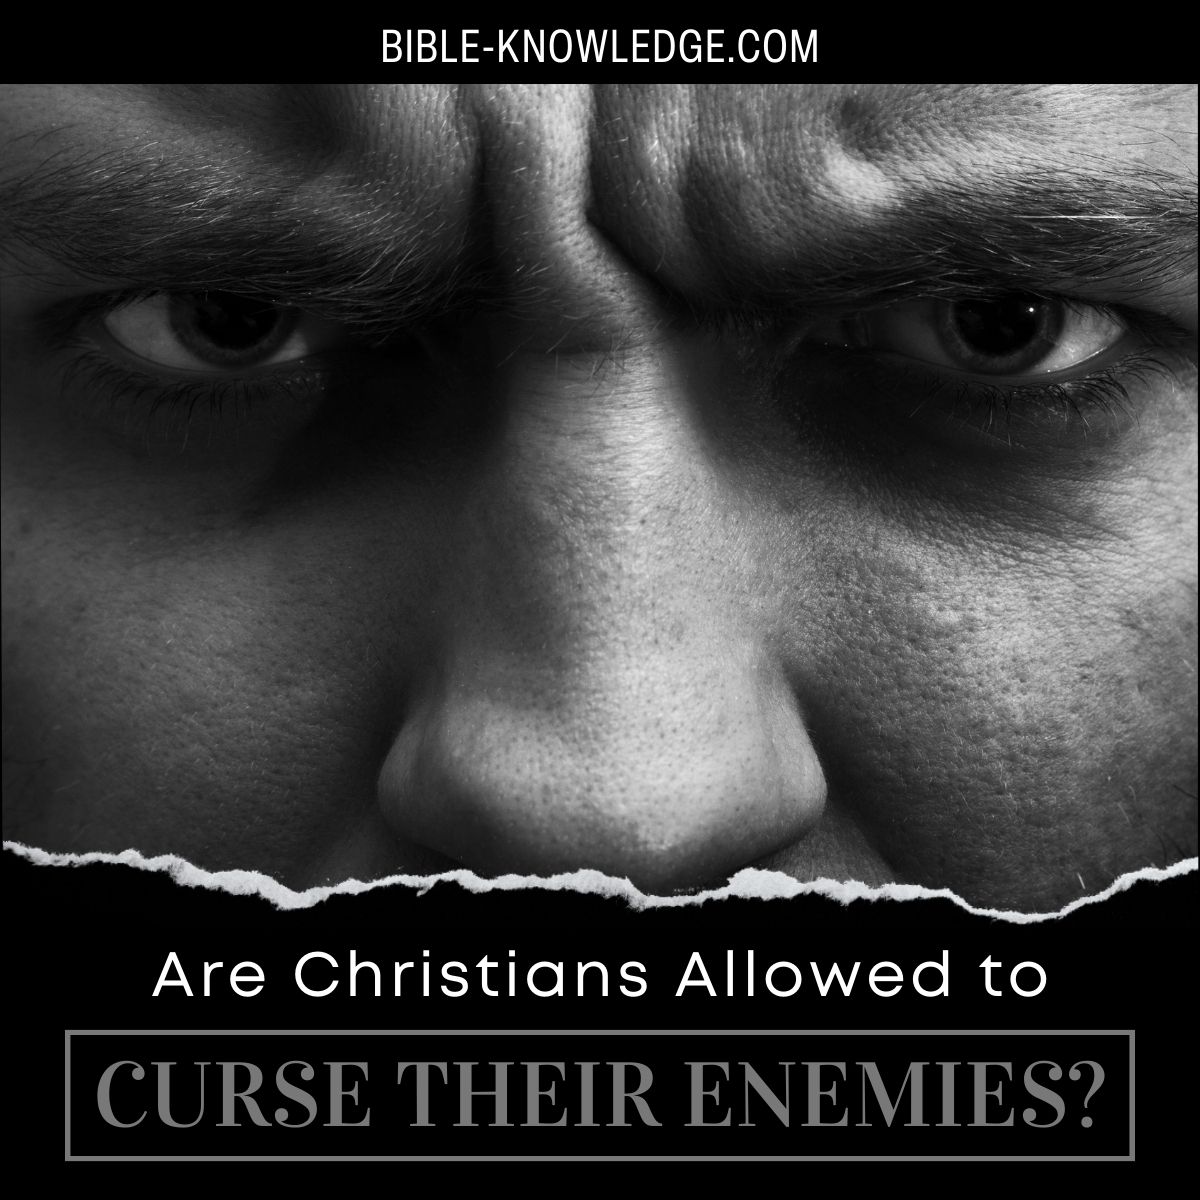 Are Christians Allowed to Curse Their Enemies?